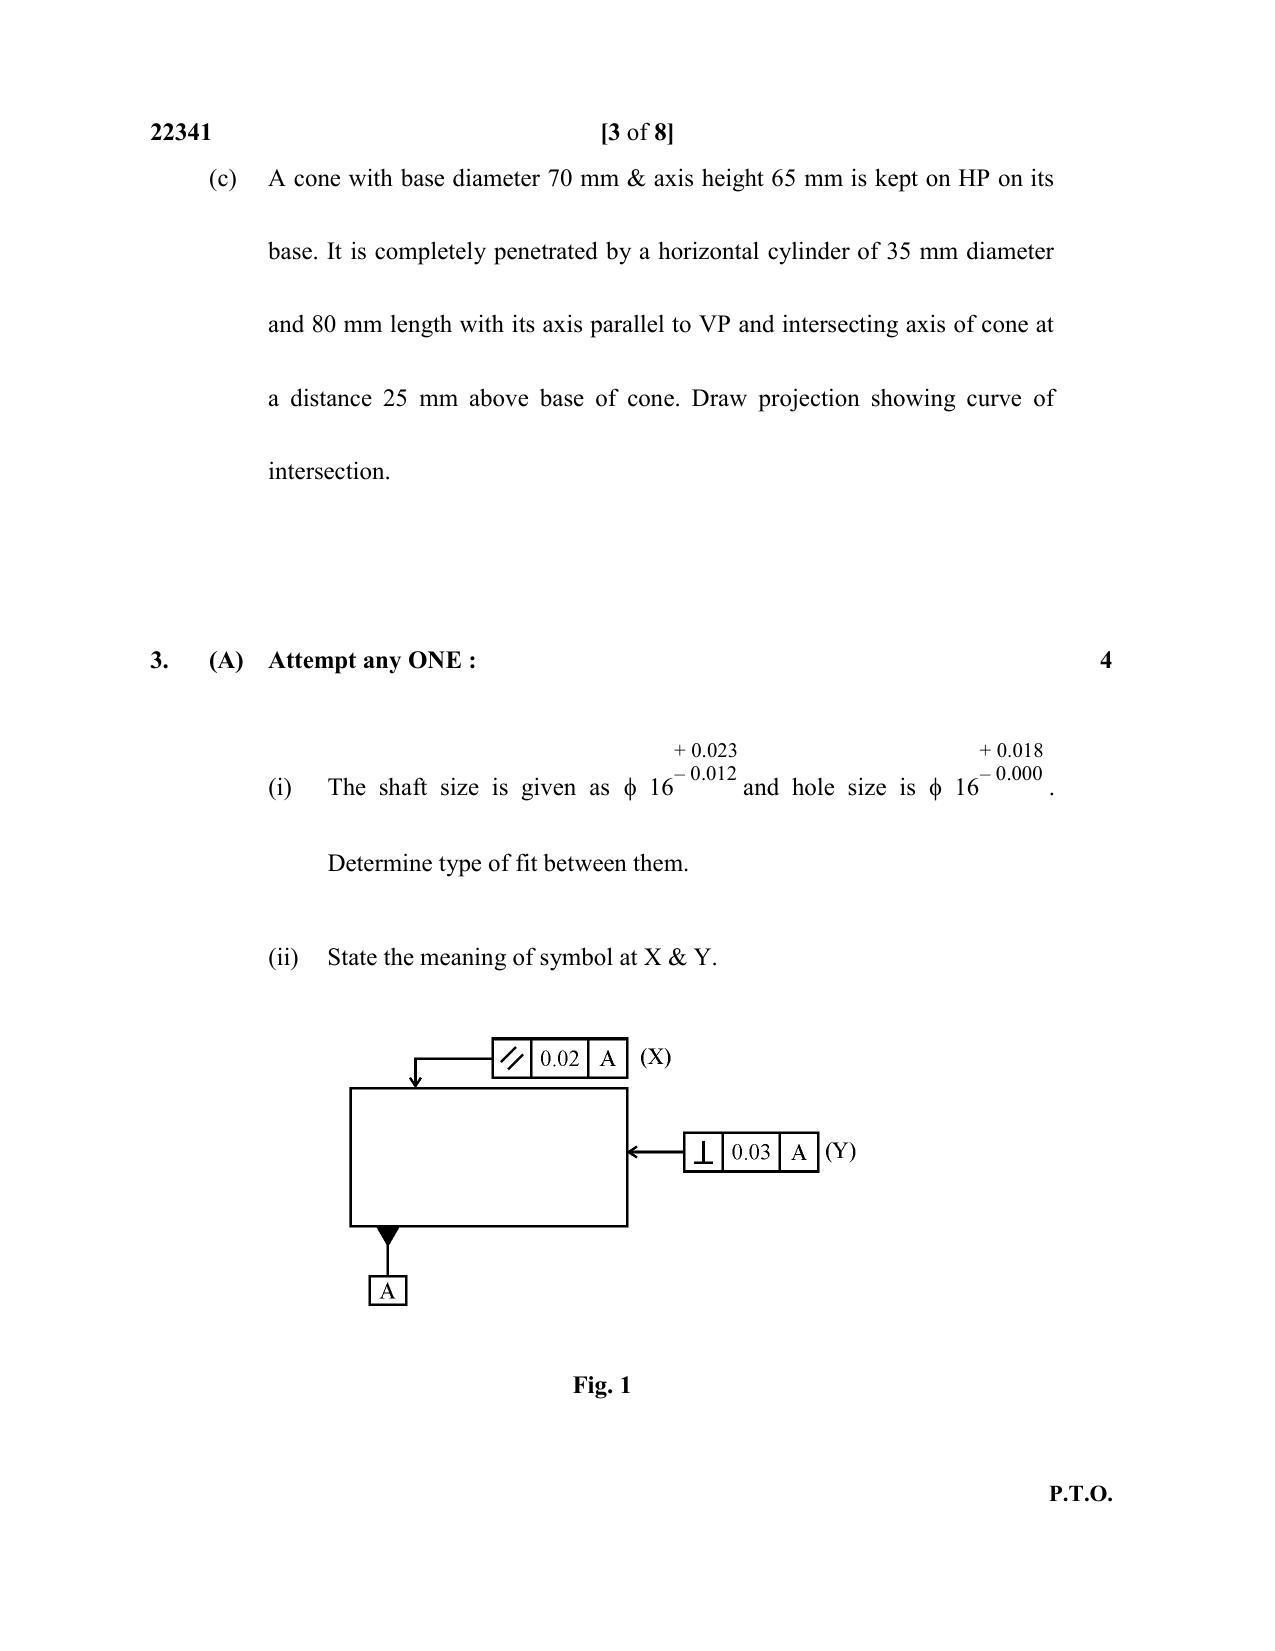 MSBTE Question Paper - 2019 - Mechanical working Drawing - Page 3